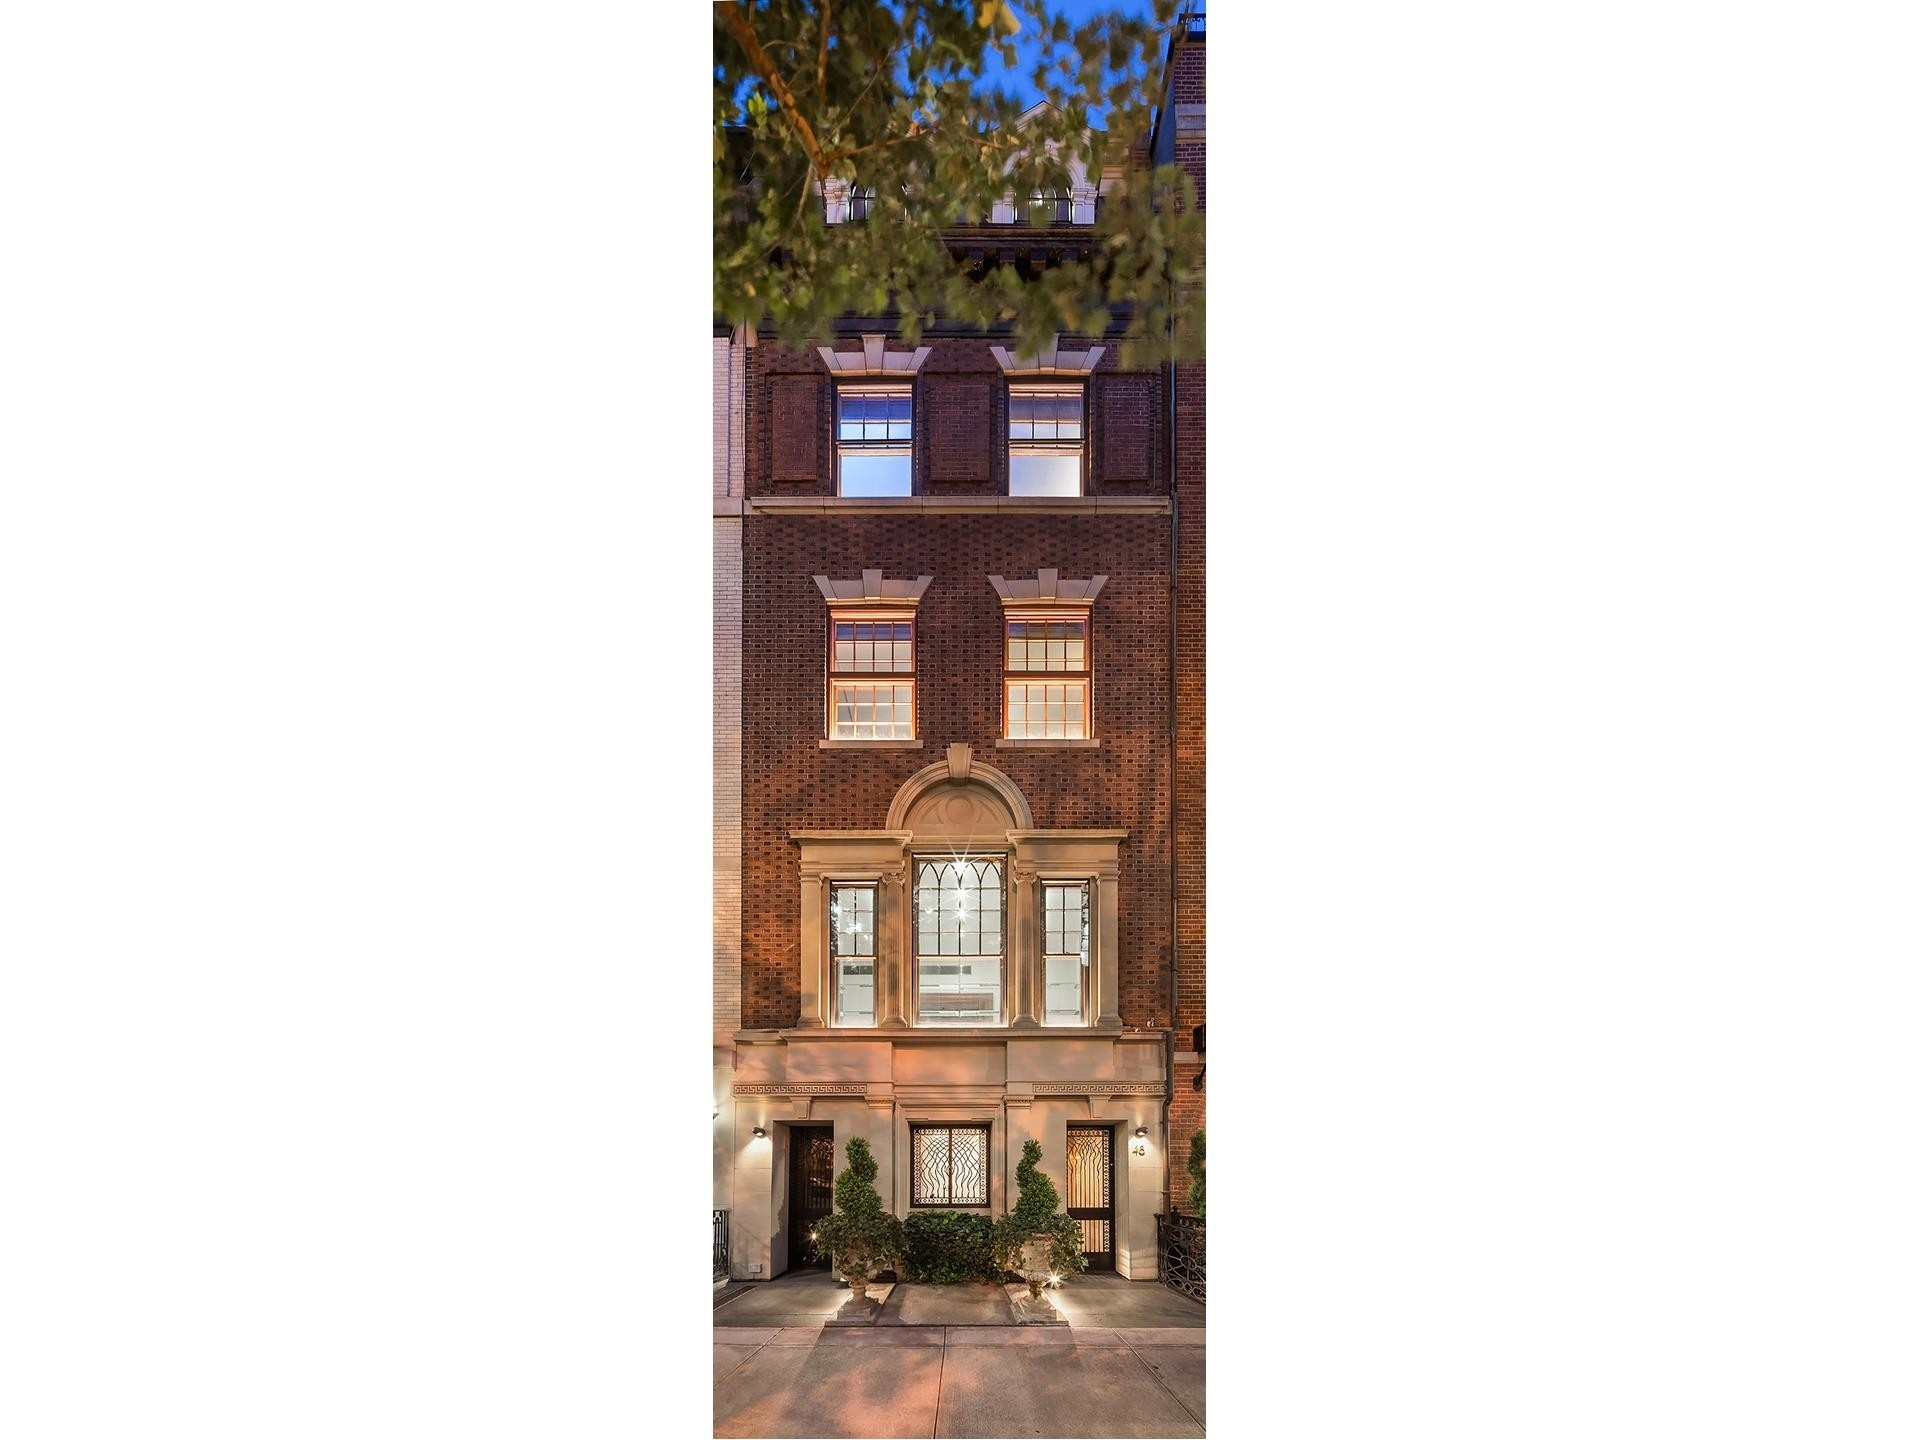 1. Single Family Townhouse for Sale at 48 E 81ST ST, TOWNHOUSE Upper East Side, New York, NY 10028